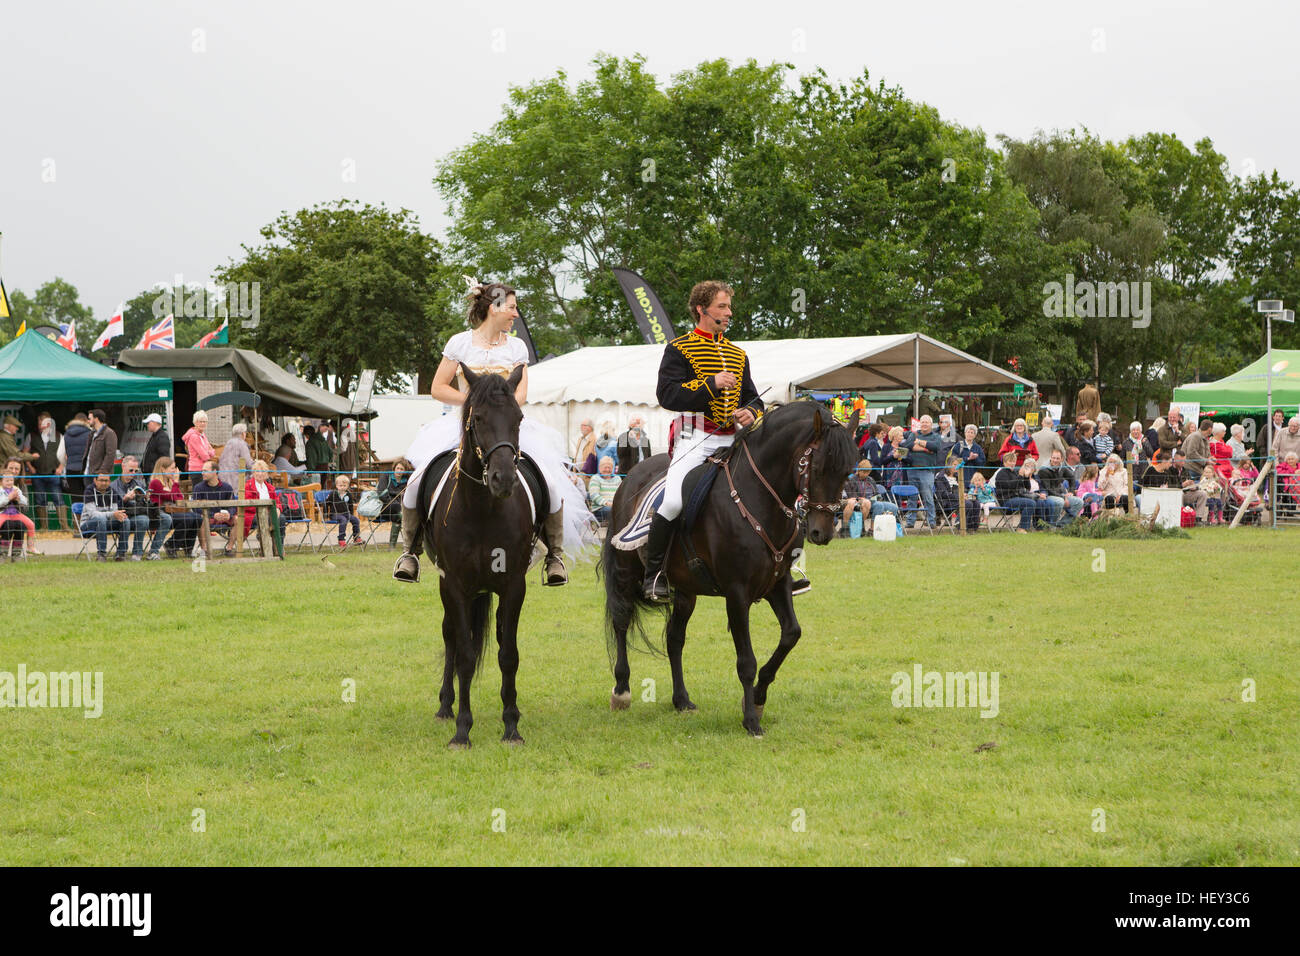 A man and women in costume ride horses at an exhibition event at the three counties show, Malvern, Worcestershire, England Stock Photo